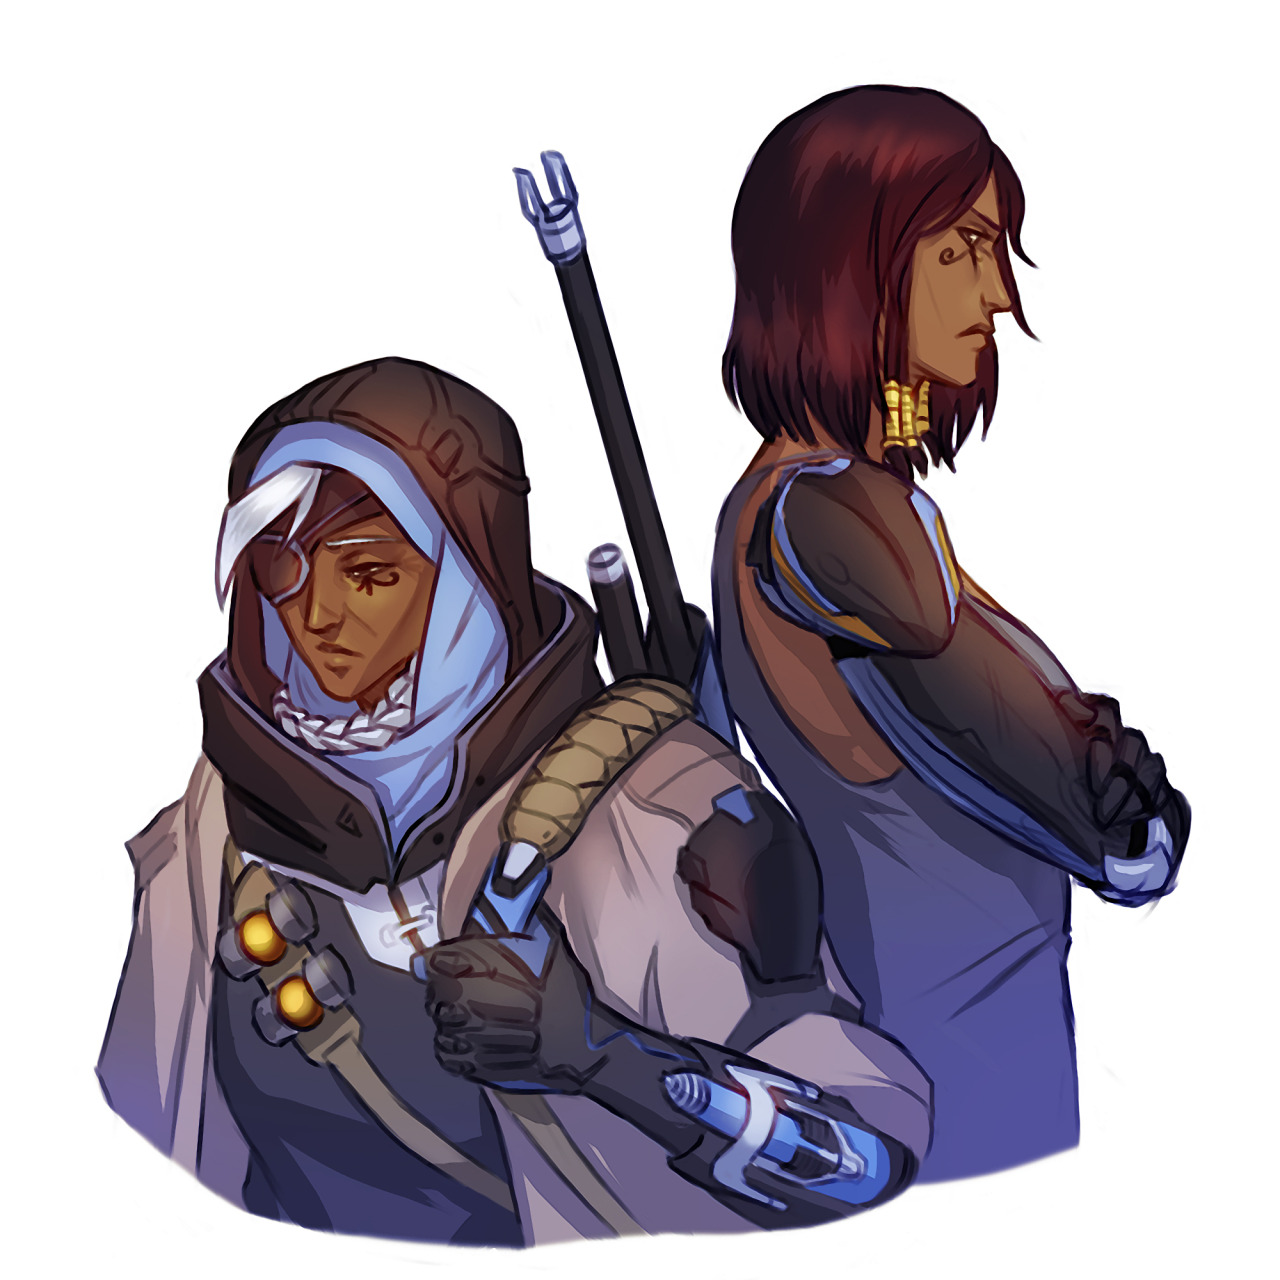 the-poop-tart666:  Ana Amari, then and now. (?) ಥ_ಥ  On an unrelated note I